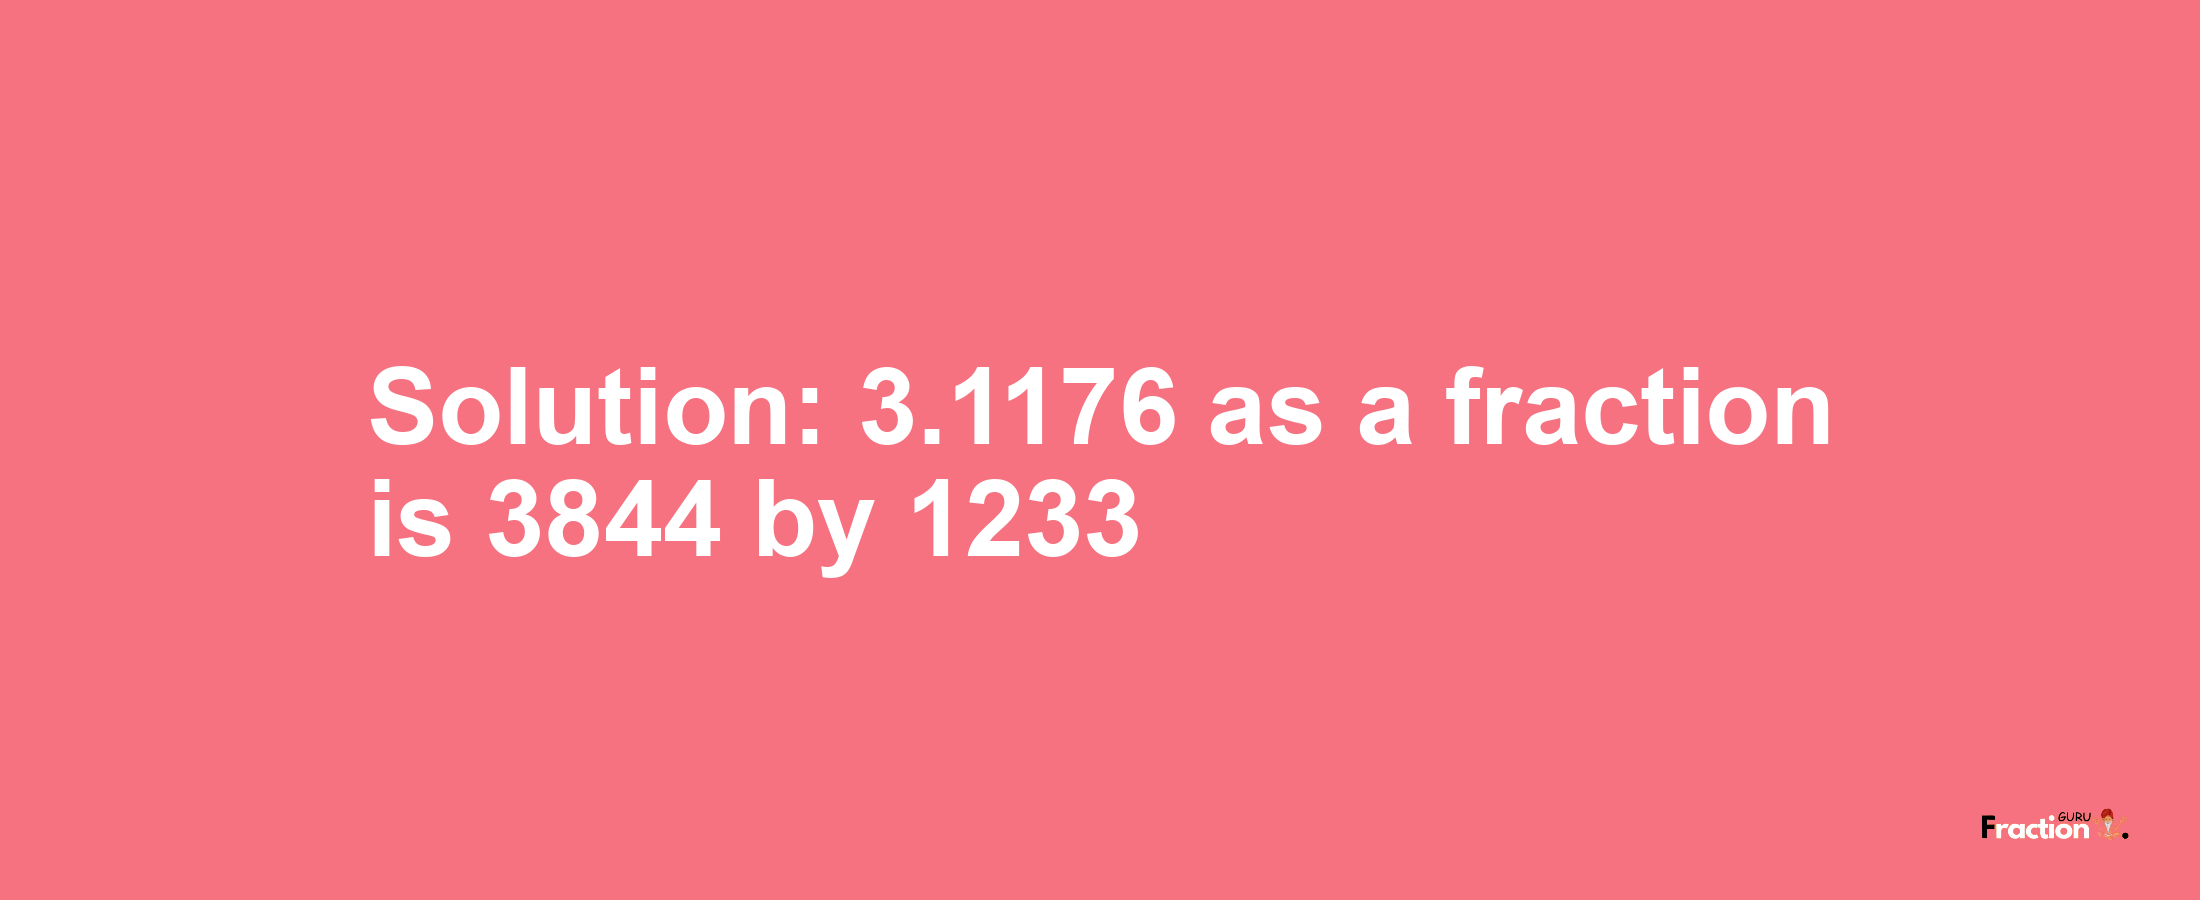 Solution:3.1176 as a fraction is 3844/1233